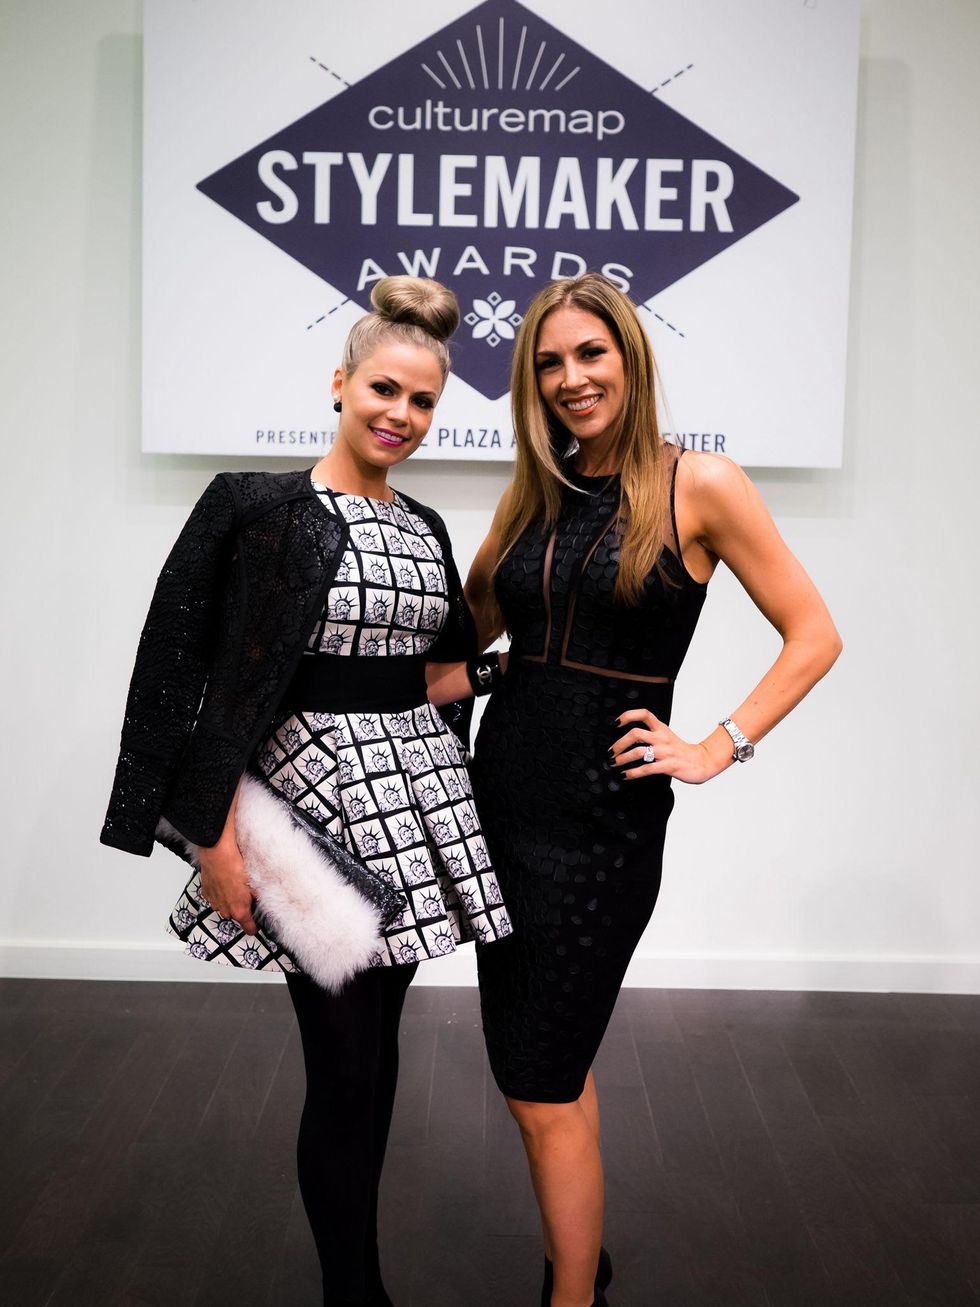 Maleiah Rogers and Melissa Rountree at 2014 CultureMap Stylemaker Awards